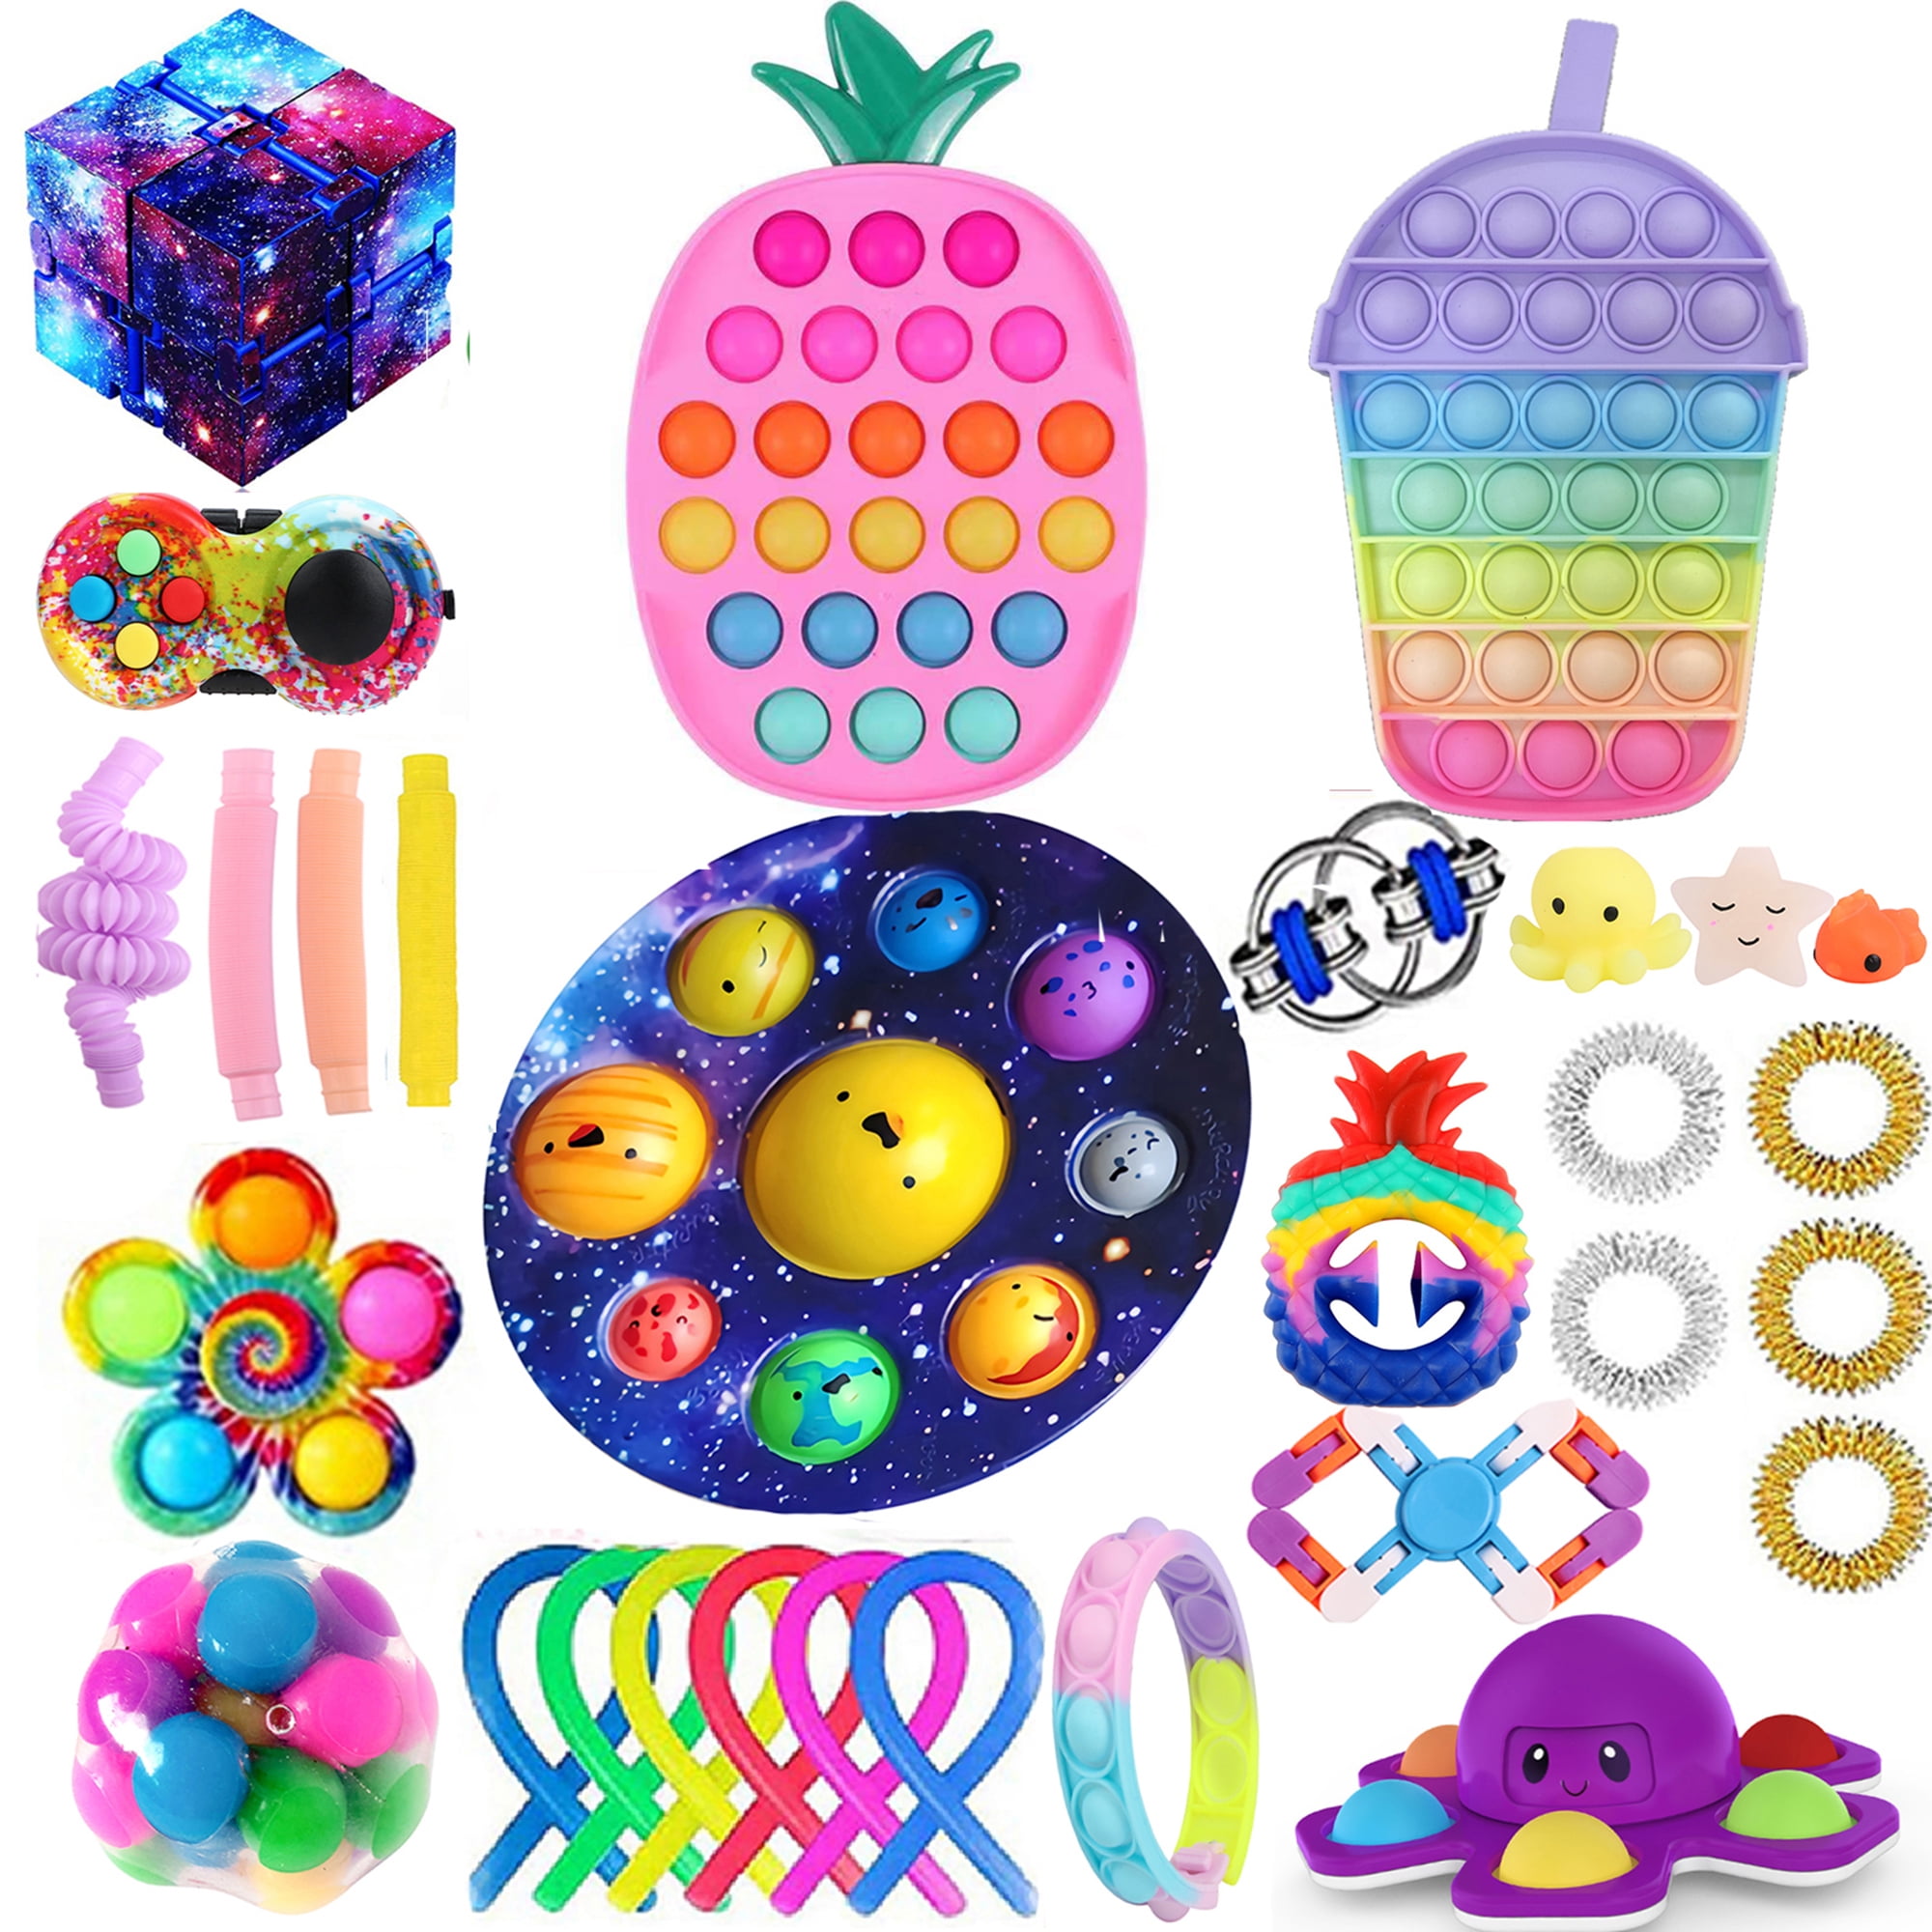 Push Pop-in-It Sensory Fidget Toys Pack Cheap with Rainbow Keyboard Happy Planet Pop Spinner Pop Anxiety Tube Fidgetet Packs Fidget Packs Fidget Toy Set Anti-Anxiety Tools 